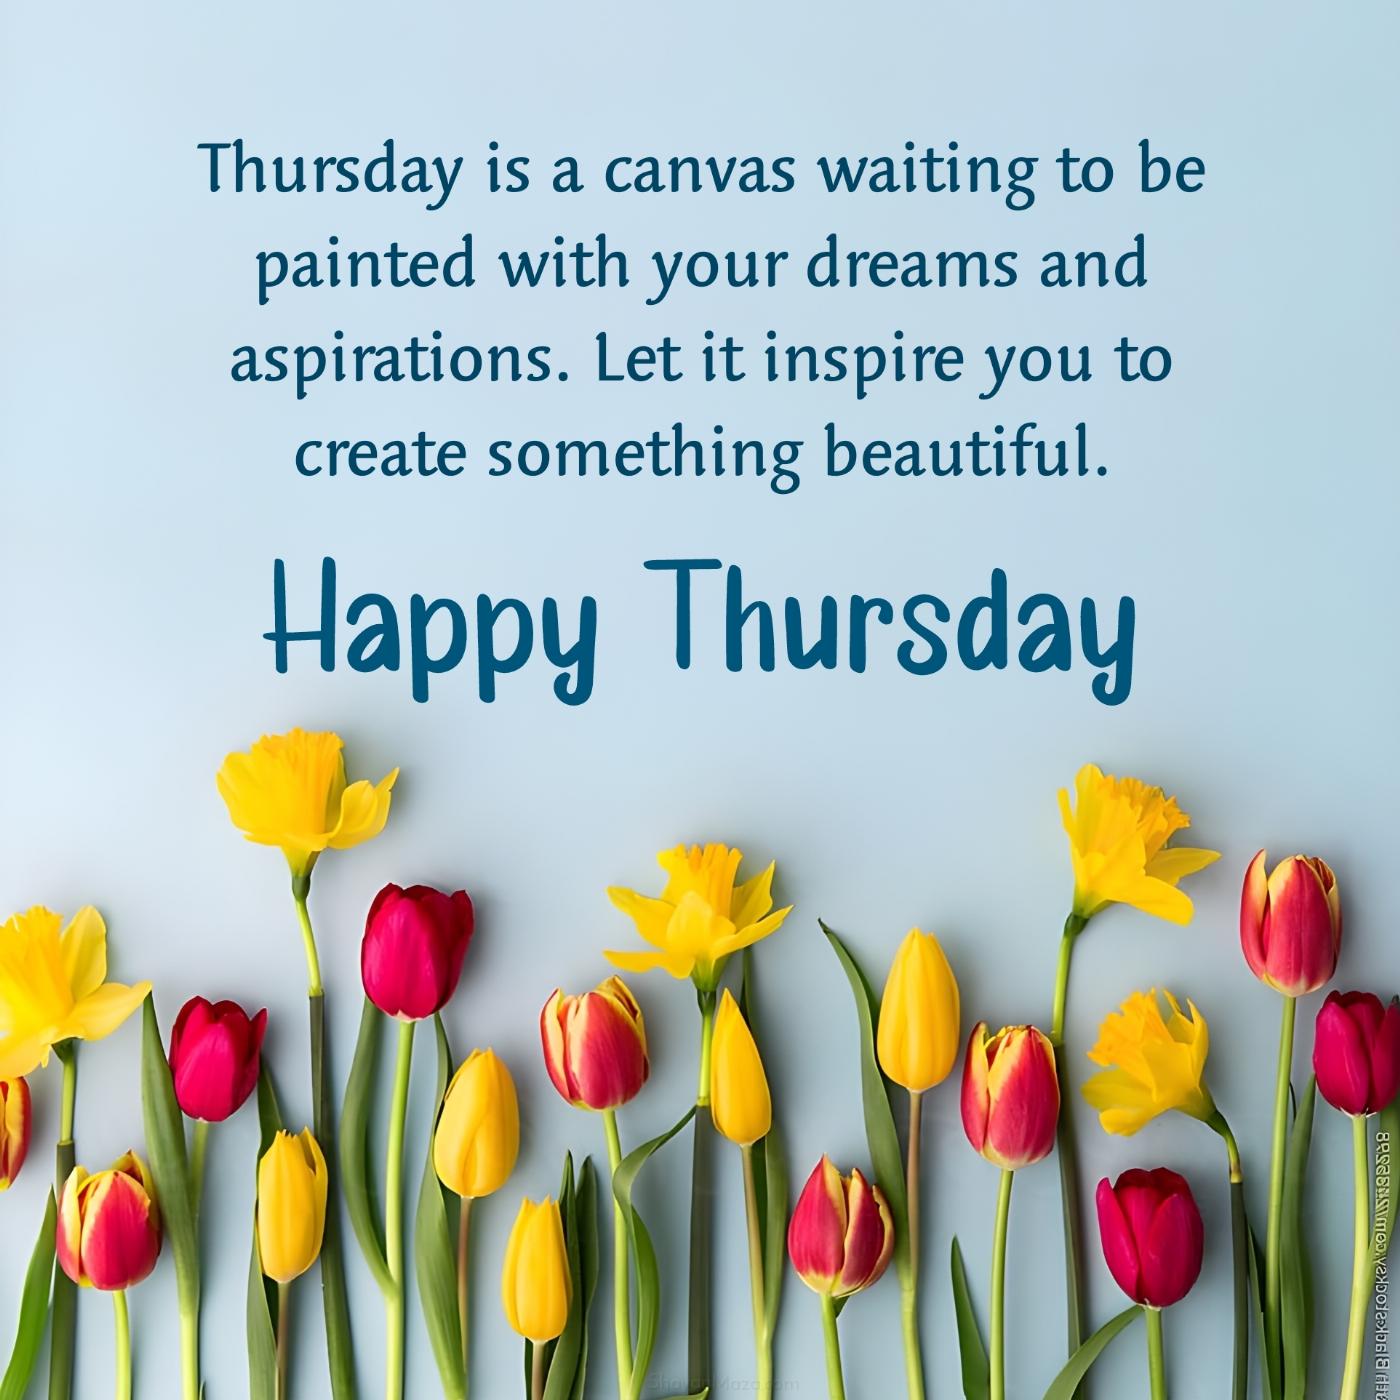 Thursday is a canvas waiting to be painted with your dreams and aspirations